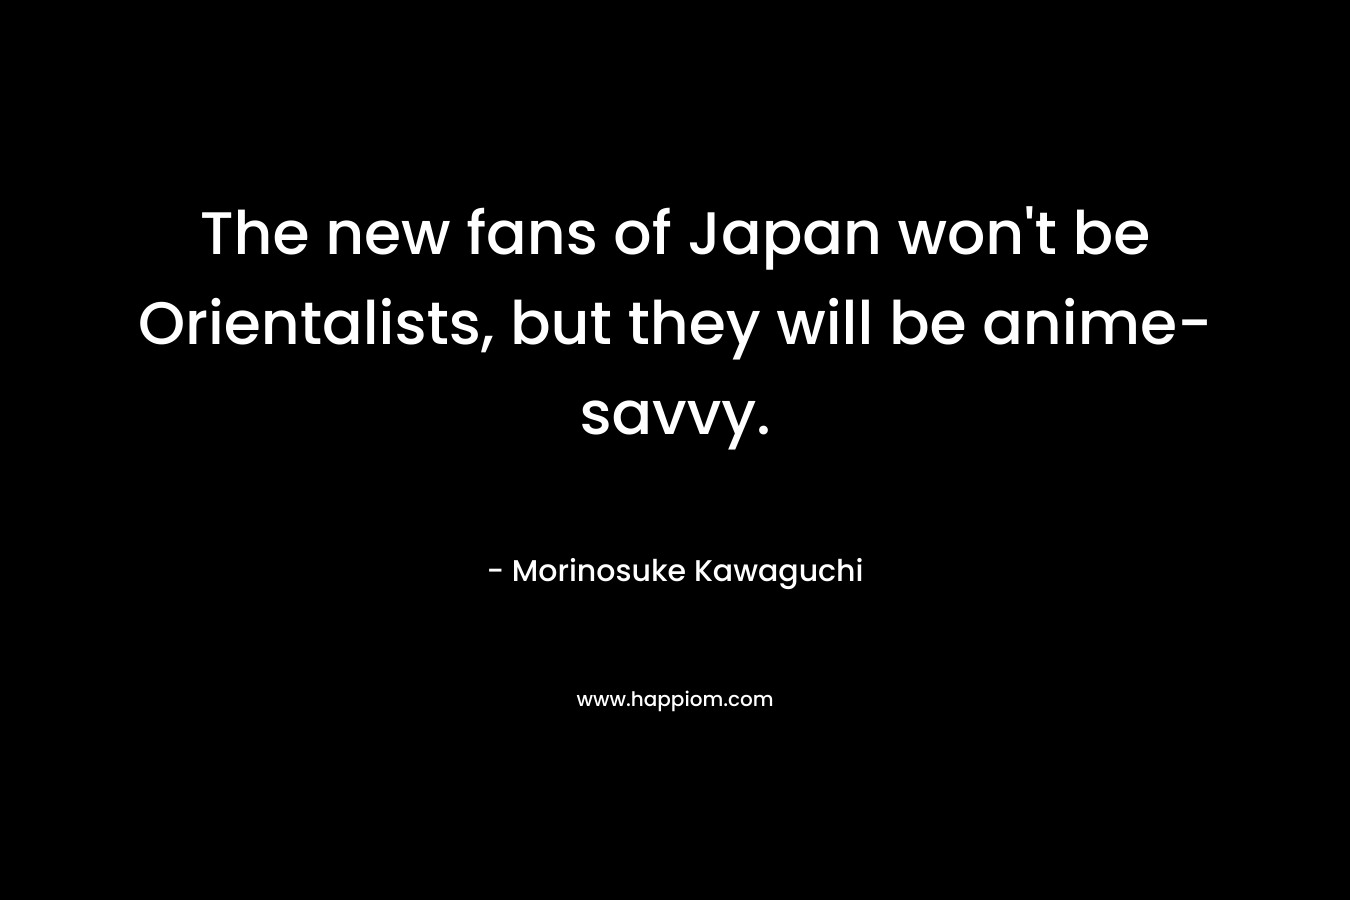 The new fans of Japan won’t be Orientalists, but they will be anime-savvy. – Morinosuke Kawaguchi